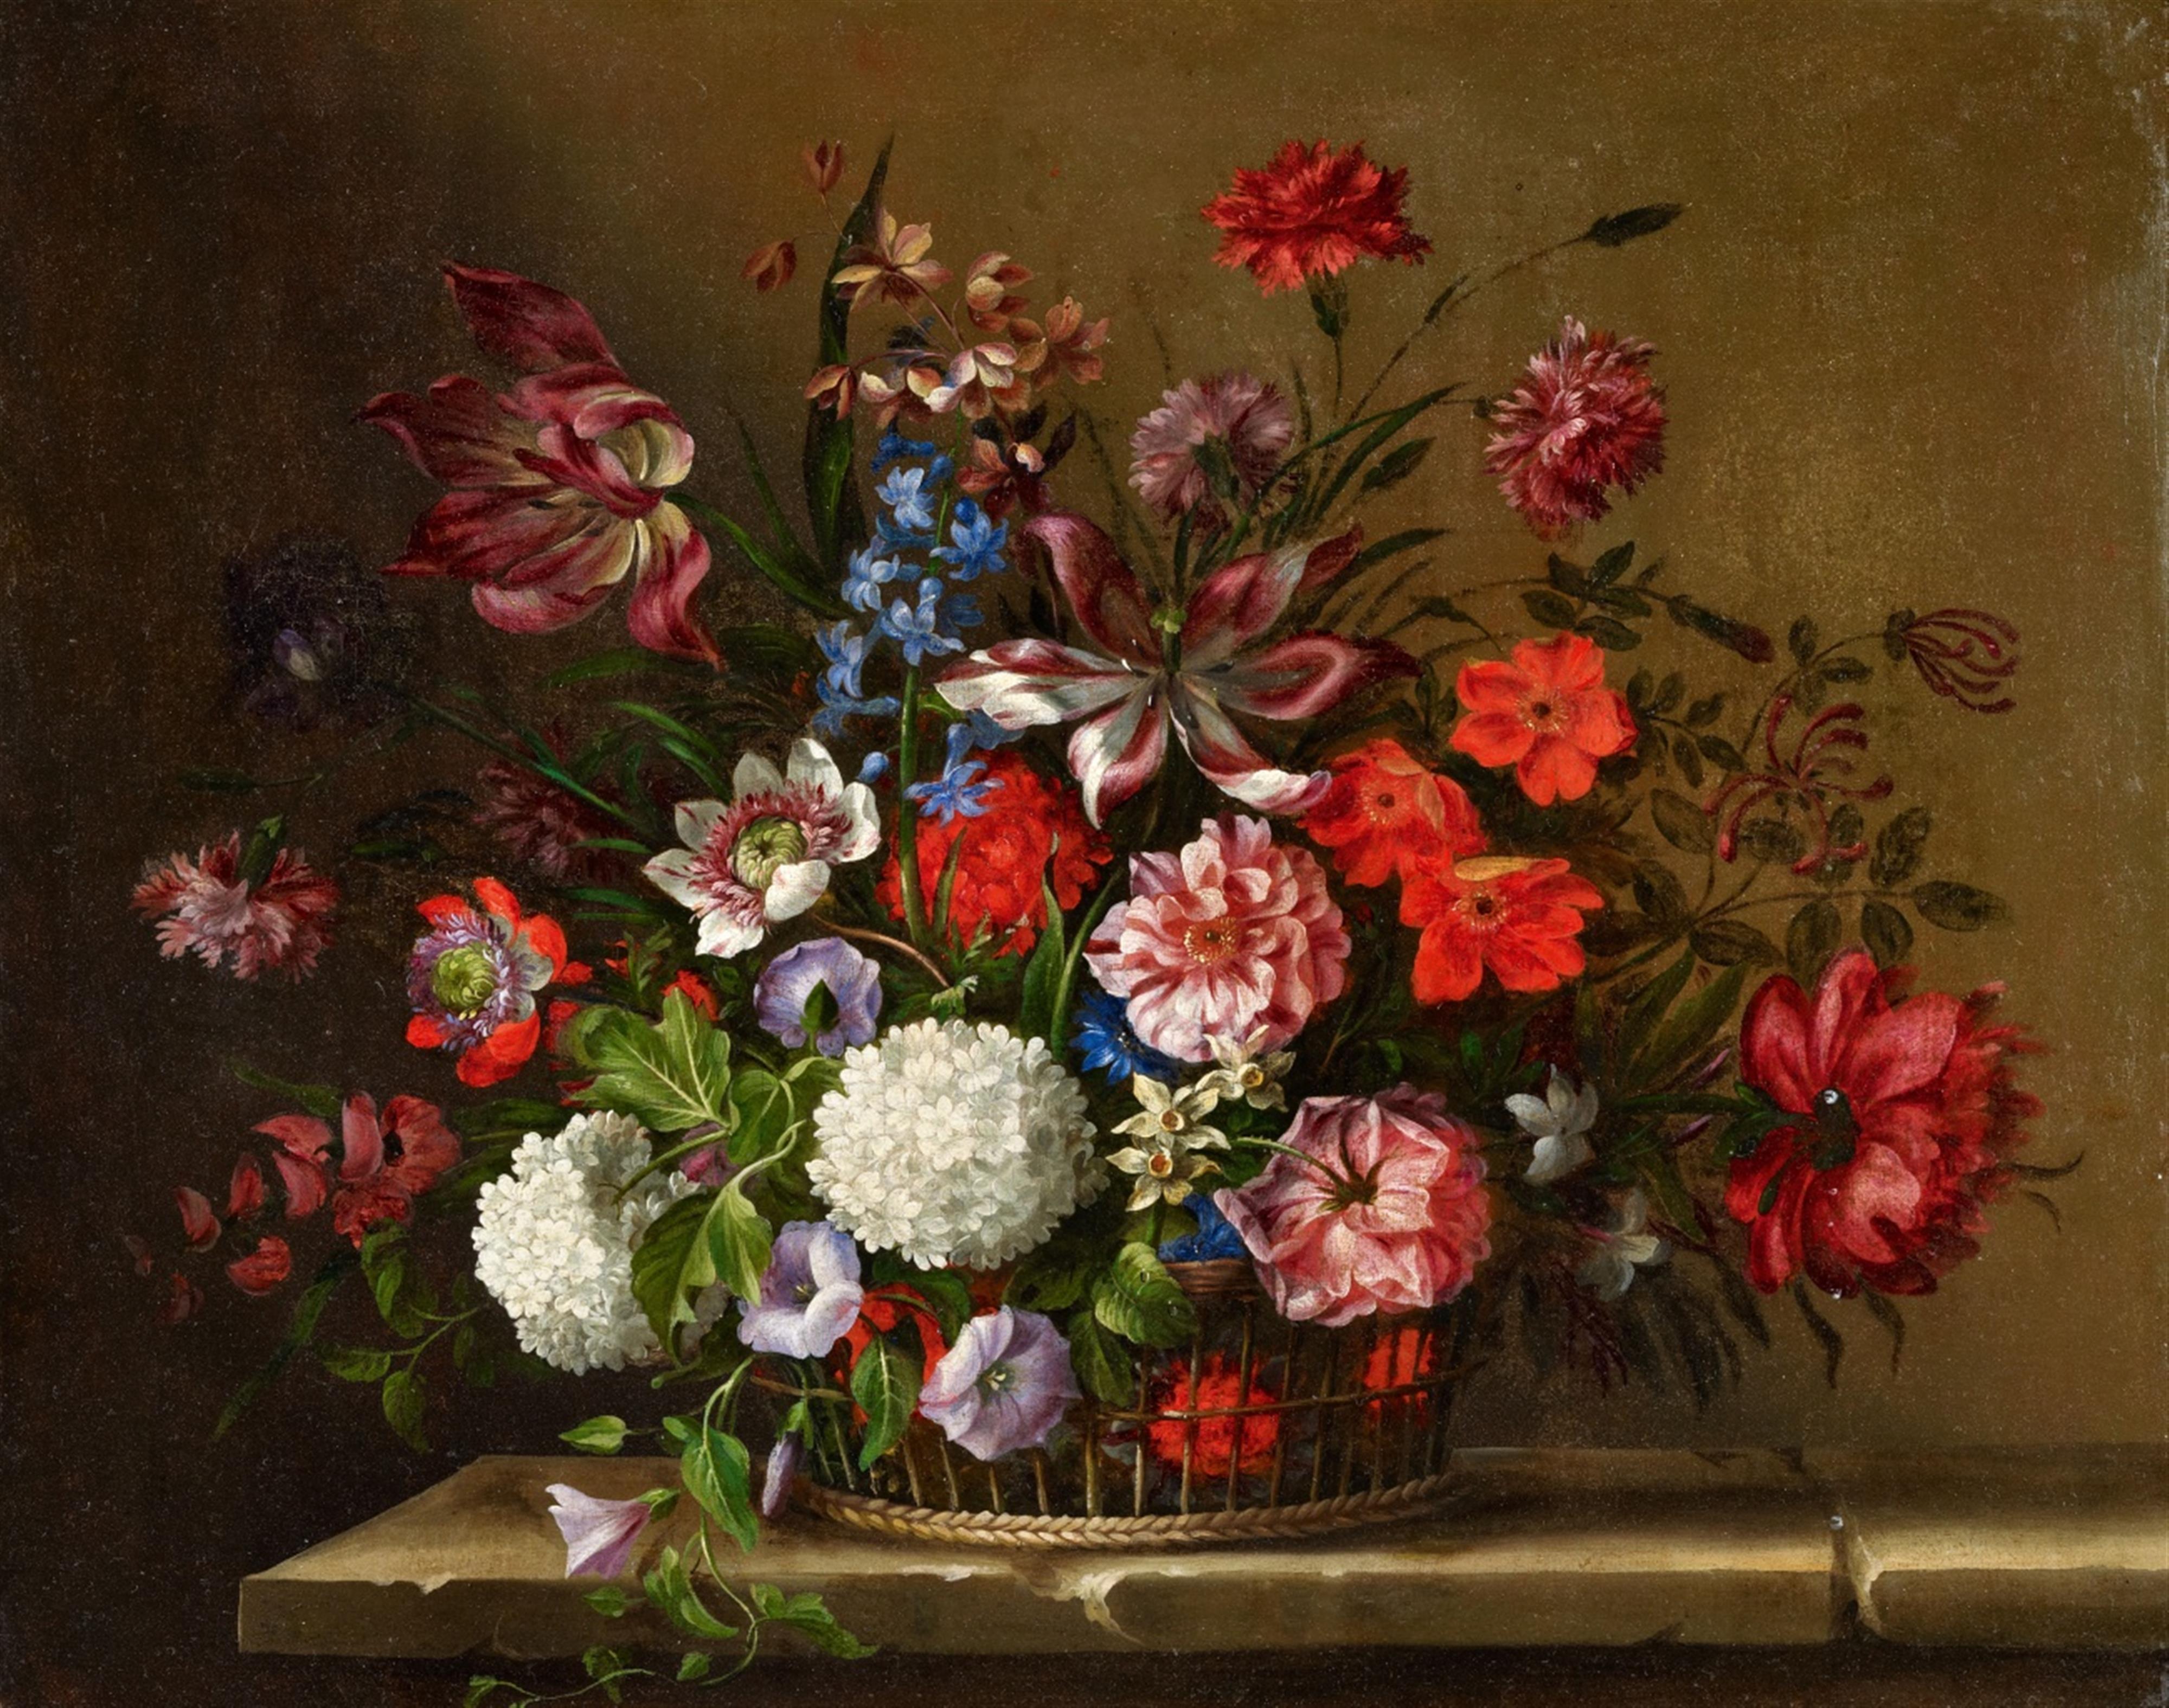 French School, 17th century - Still Life with Snowball Flowers, Tulips, and other Flowers in a Basket - image-1